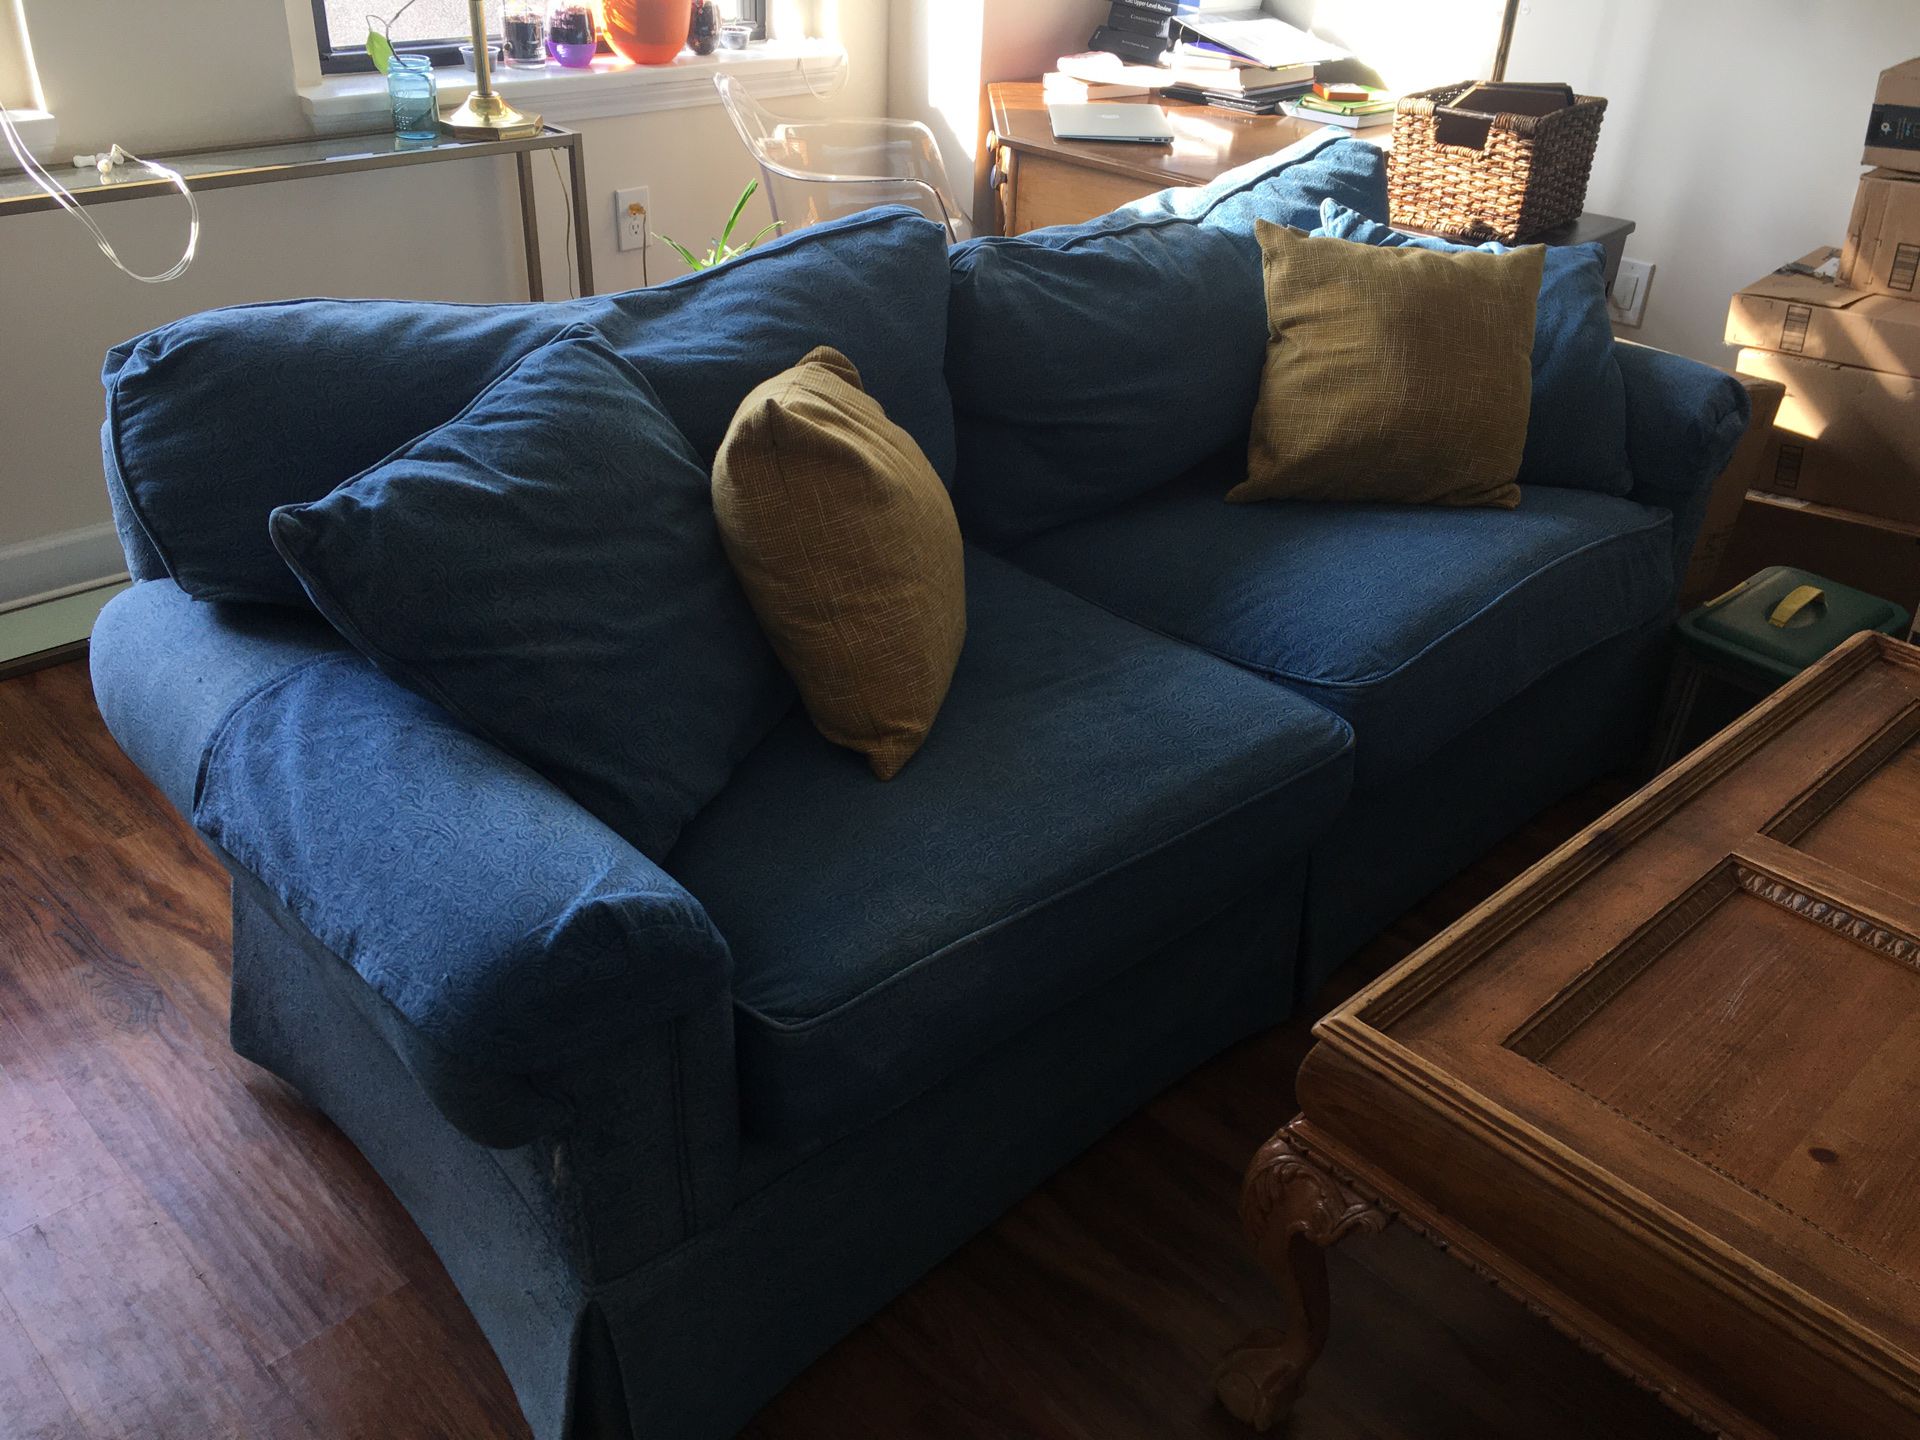 Blue Couch and Pillows